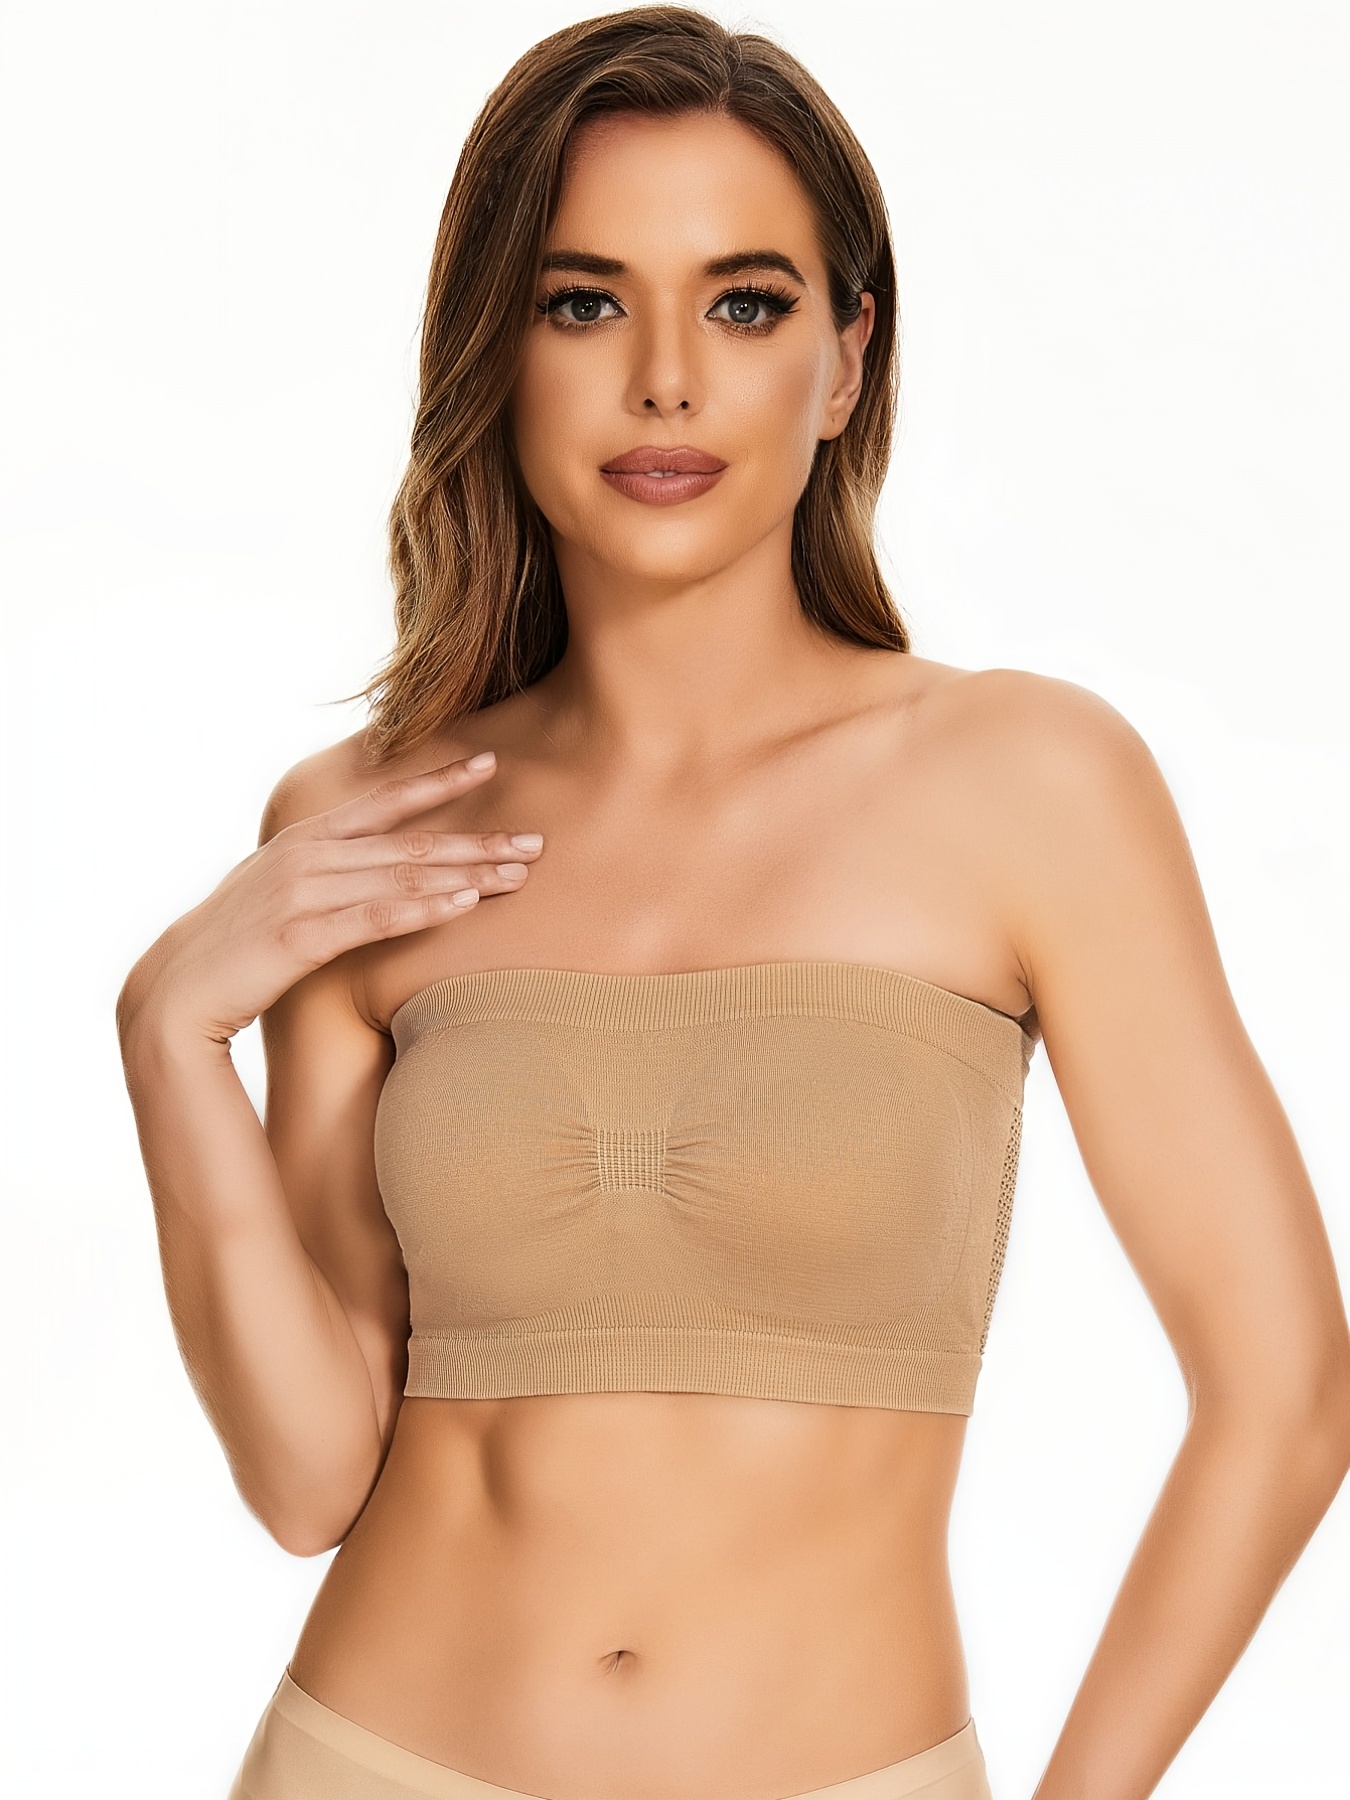 IMISSILLEB Women Plus Size Stretch Strapless Bra Seamless Bandeau Bra  Removable Padded Tube Tops Soft Bralette Bras (Beige, Small) at   Women's Clothing store